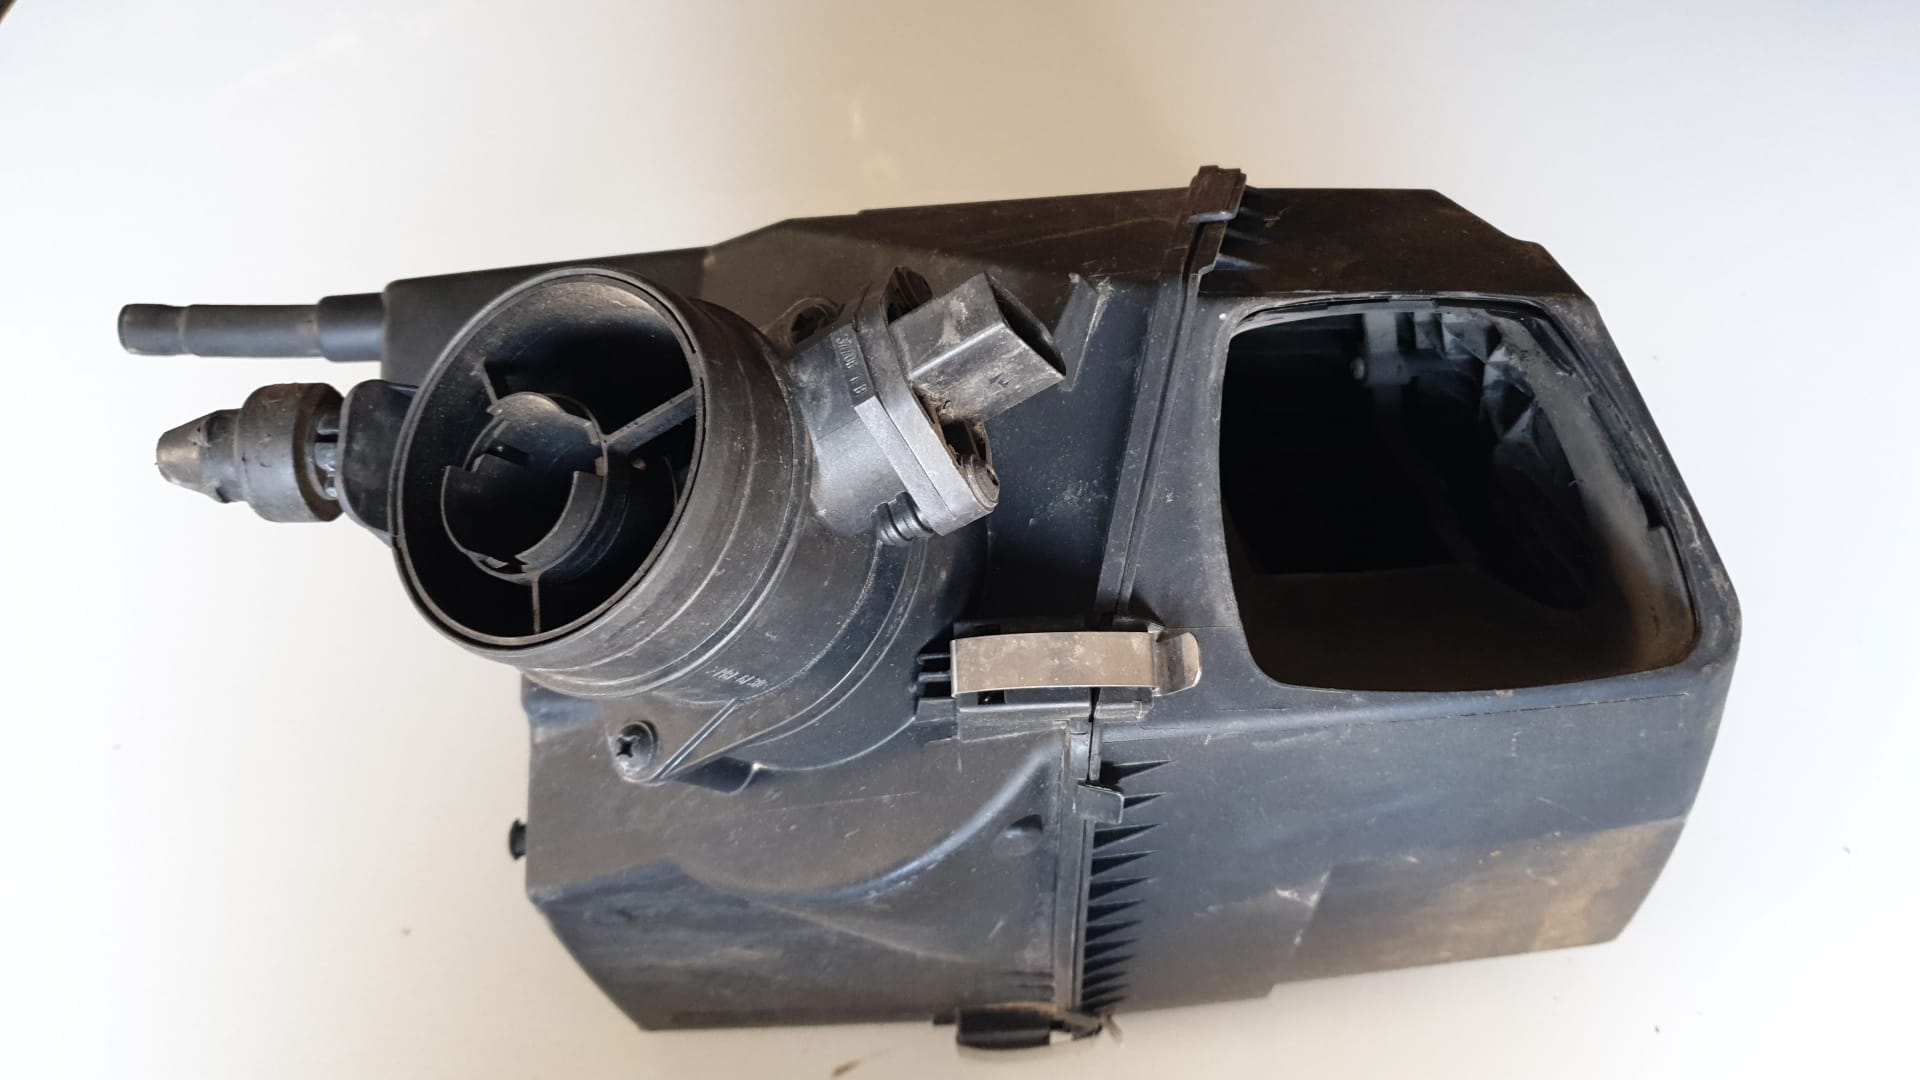 AUDI A6 C6/4F (2004-2011) Other Engine Compartment Parts 4F0133835H, 4F0133835H 25233391